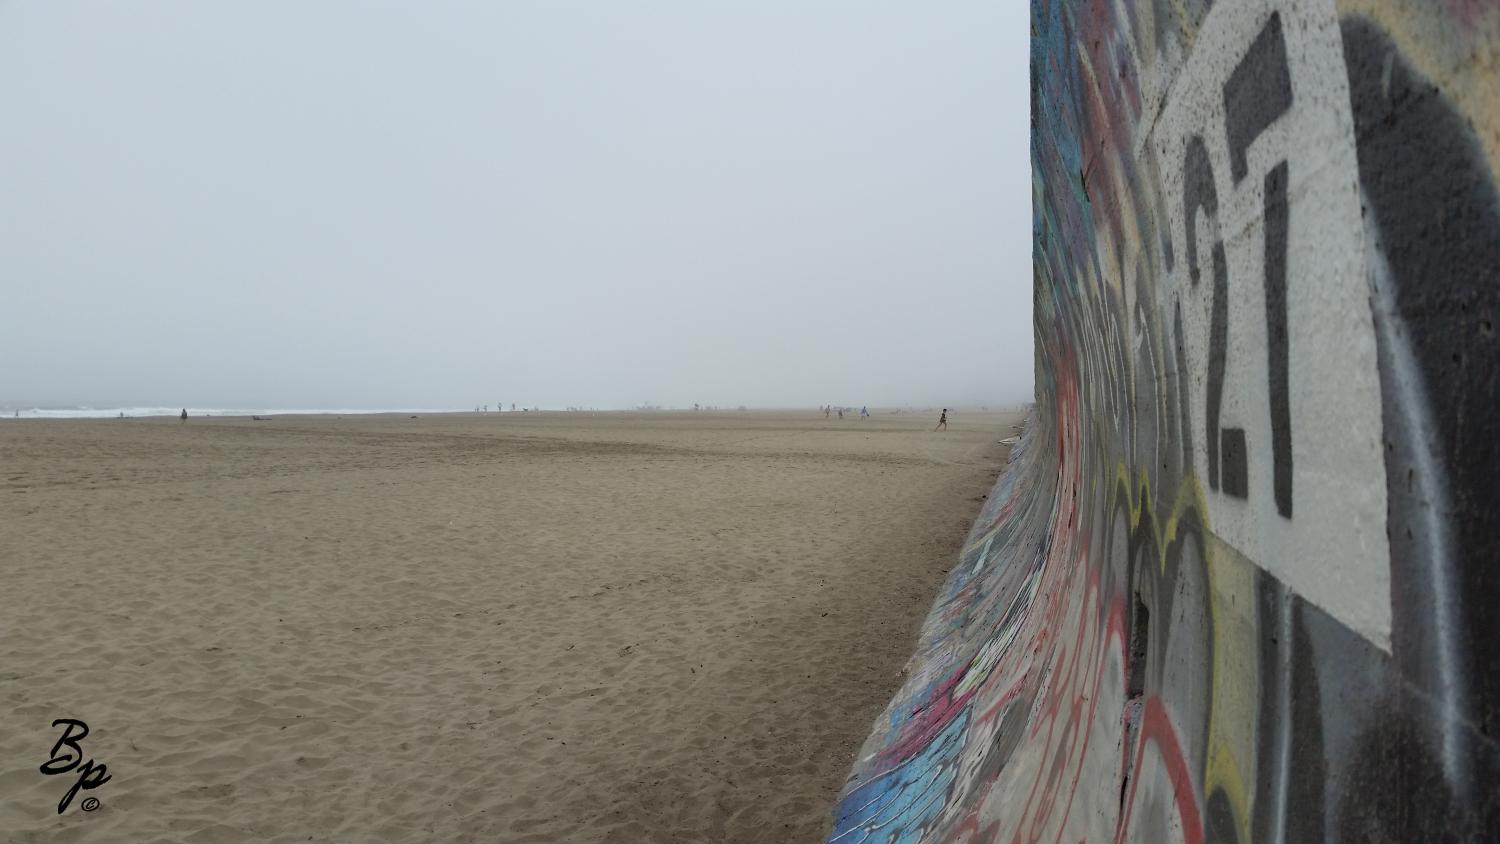 SF North Beach, I think, a long beach, full of sand, graffiti covered concrete seawall stretching to infinity on the right, number 27 prominent, a very foggy day